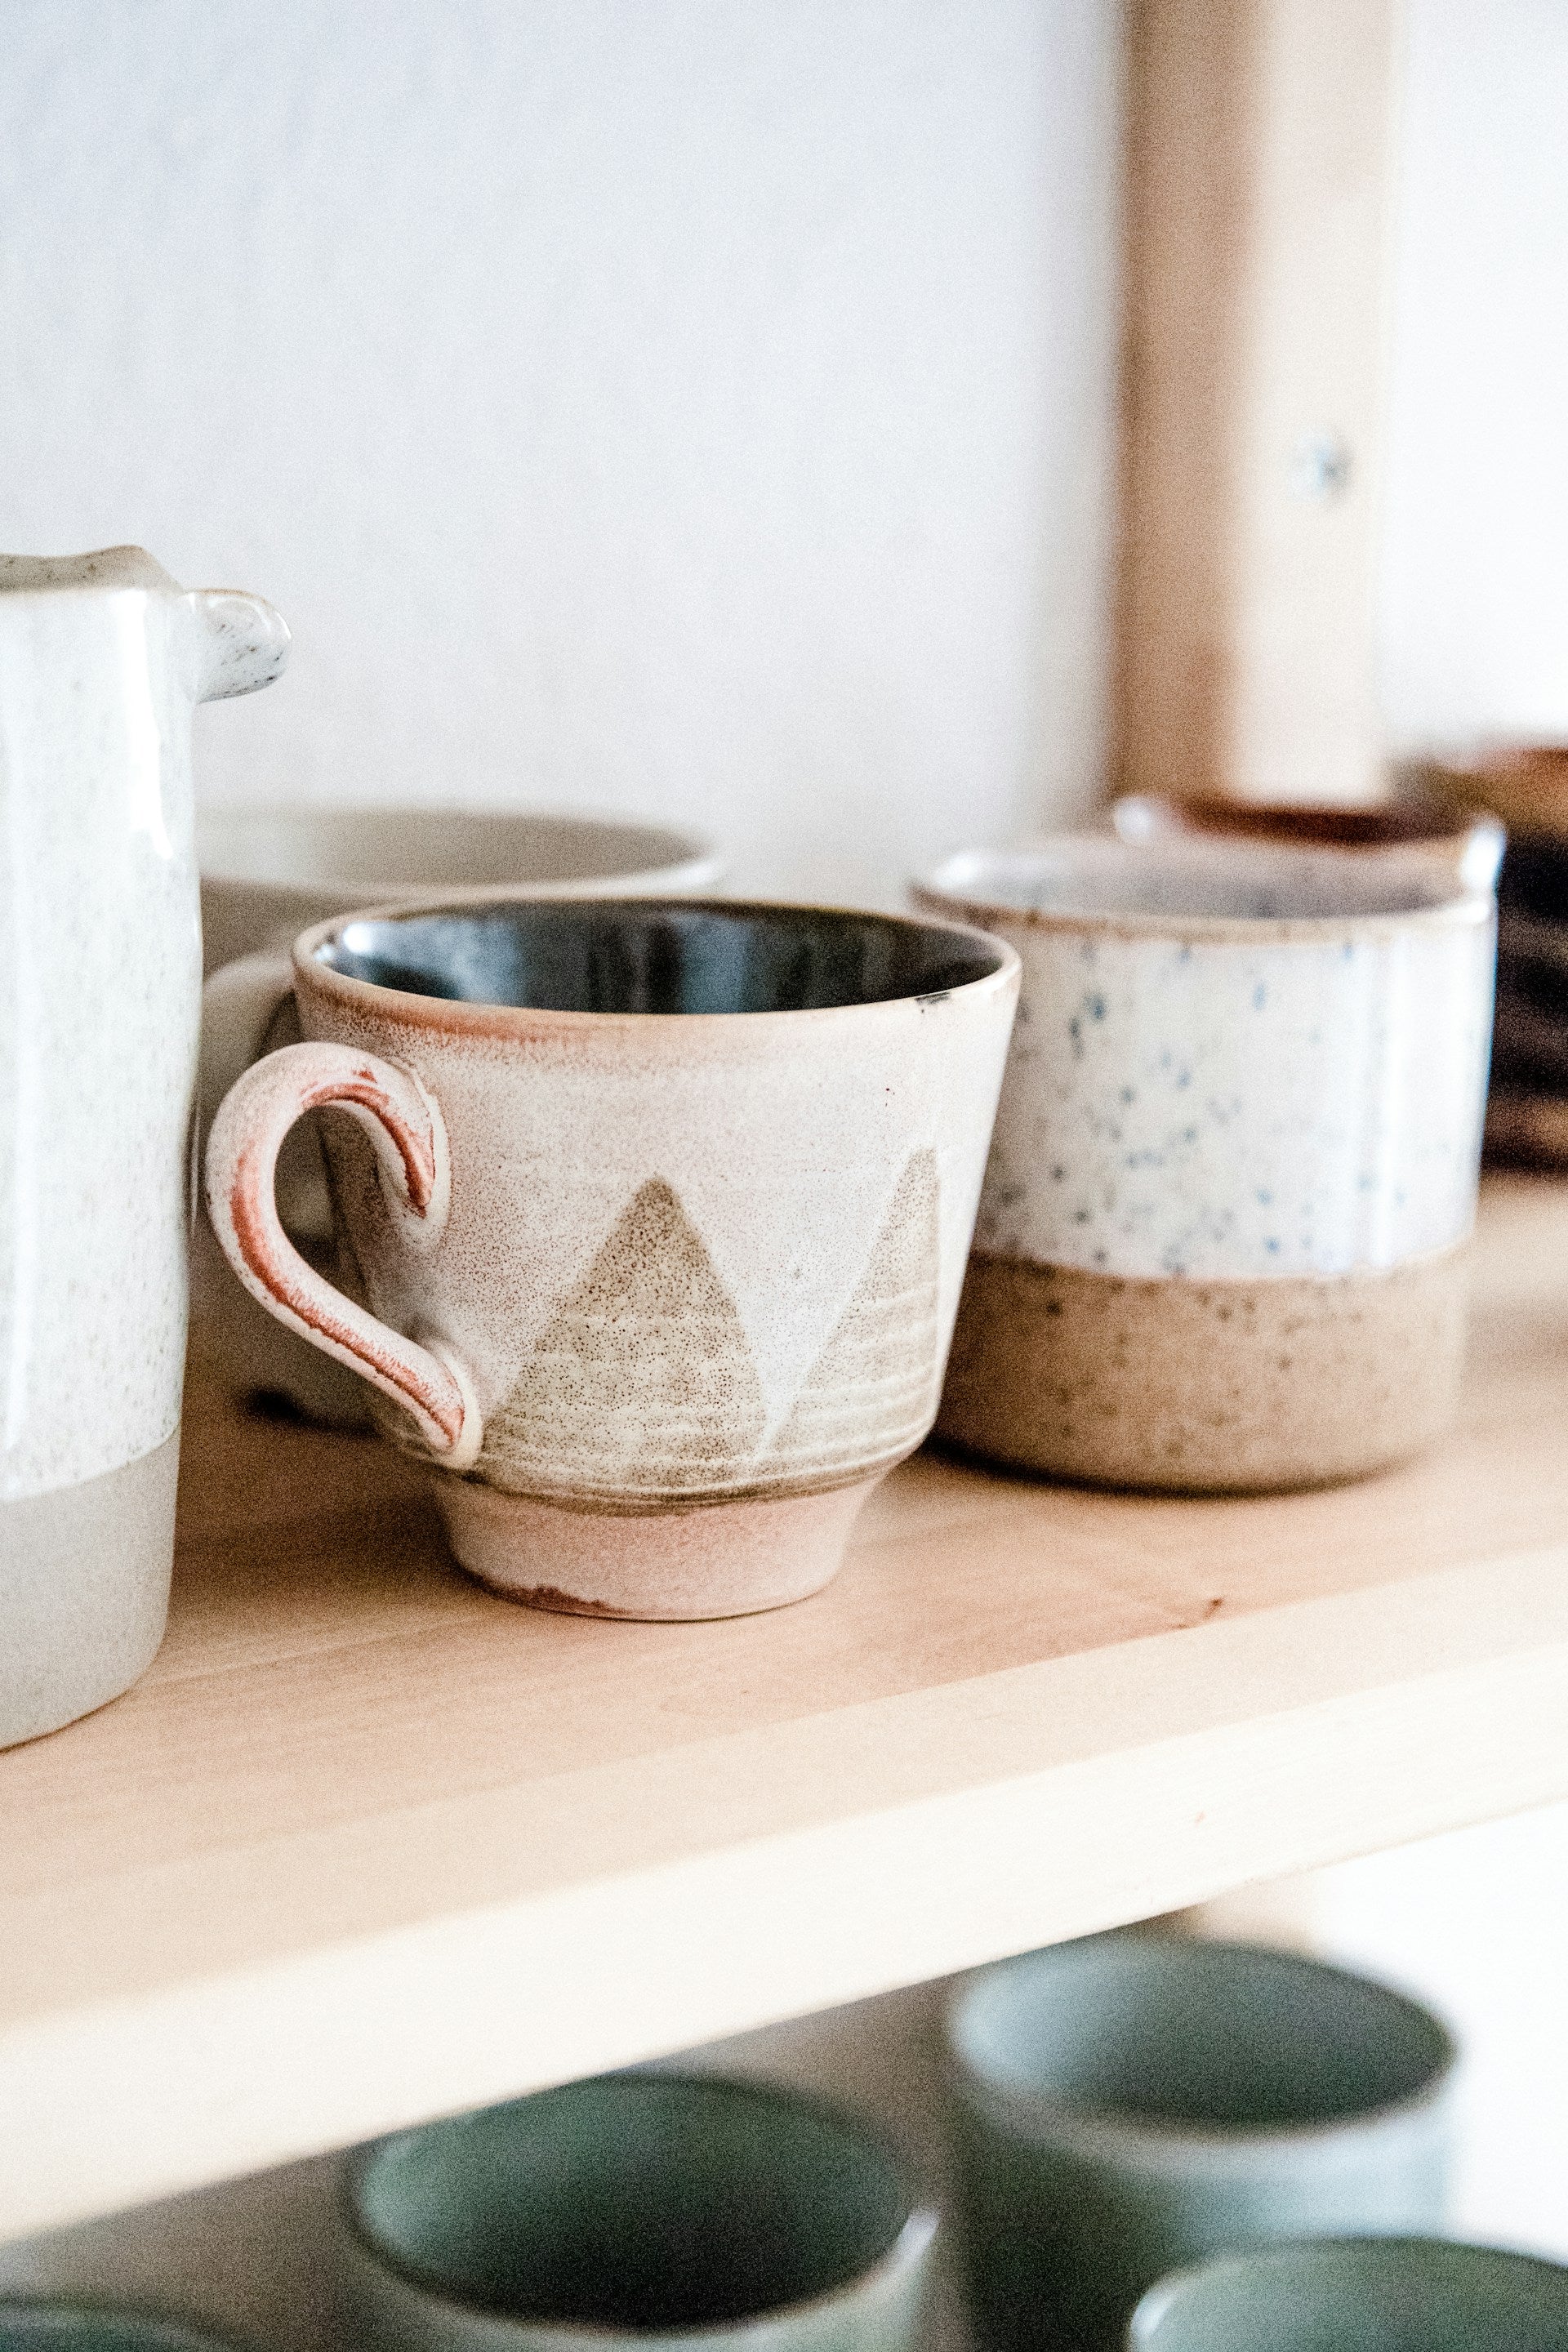 Rustic pottery cups on a wooden shelf.